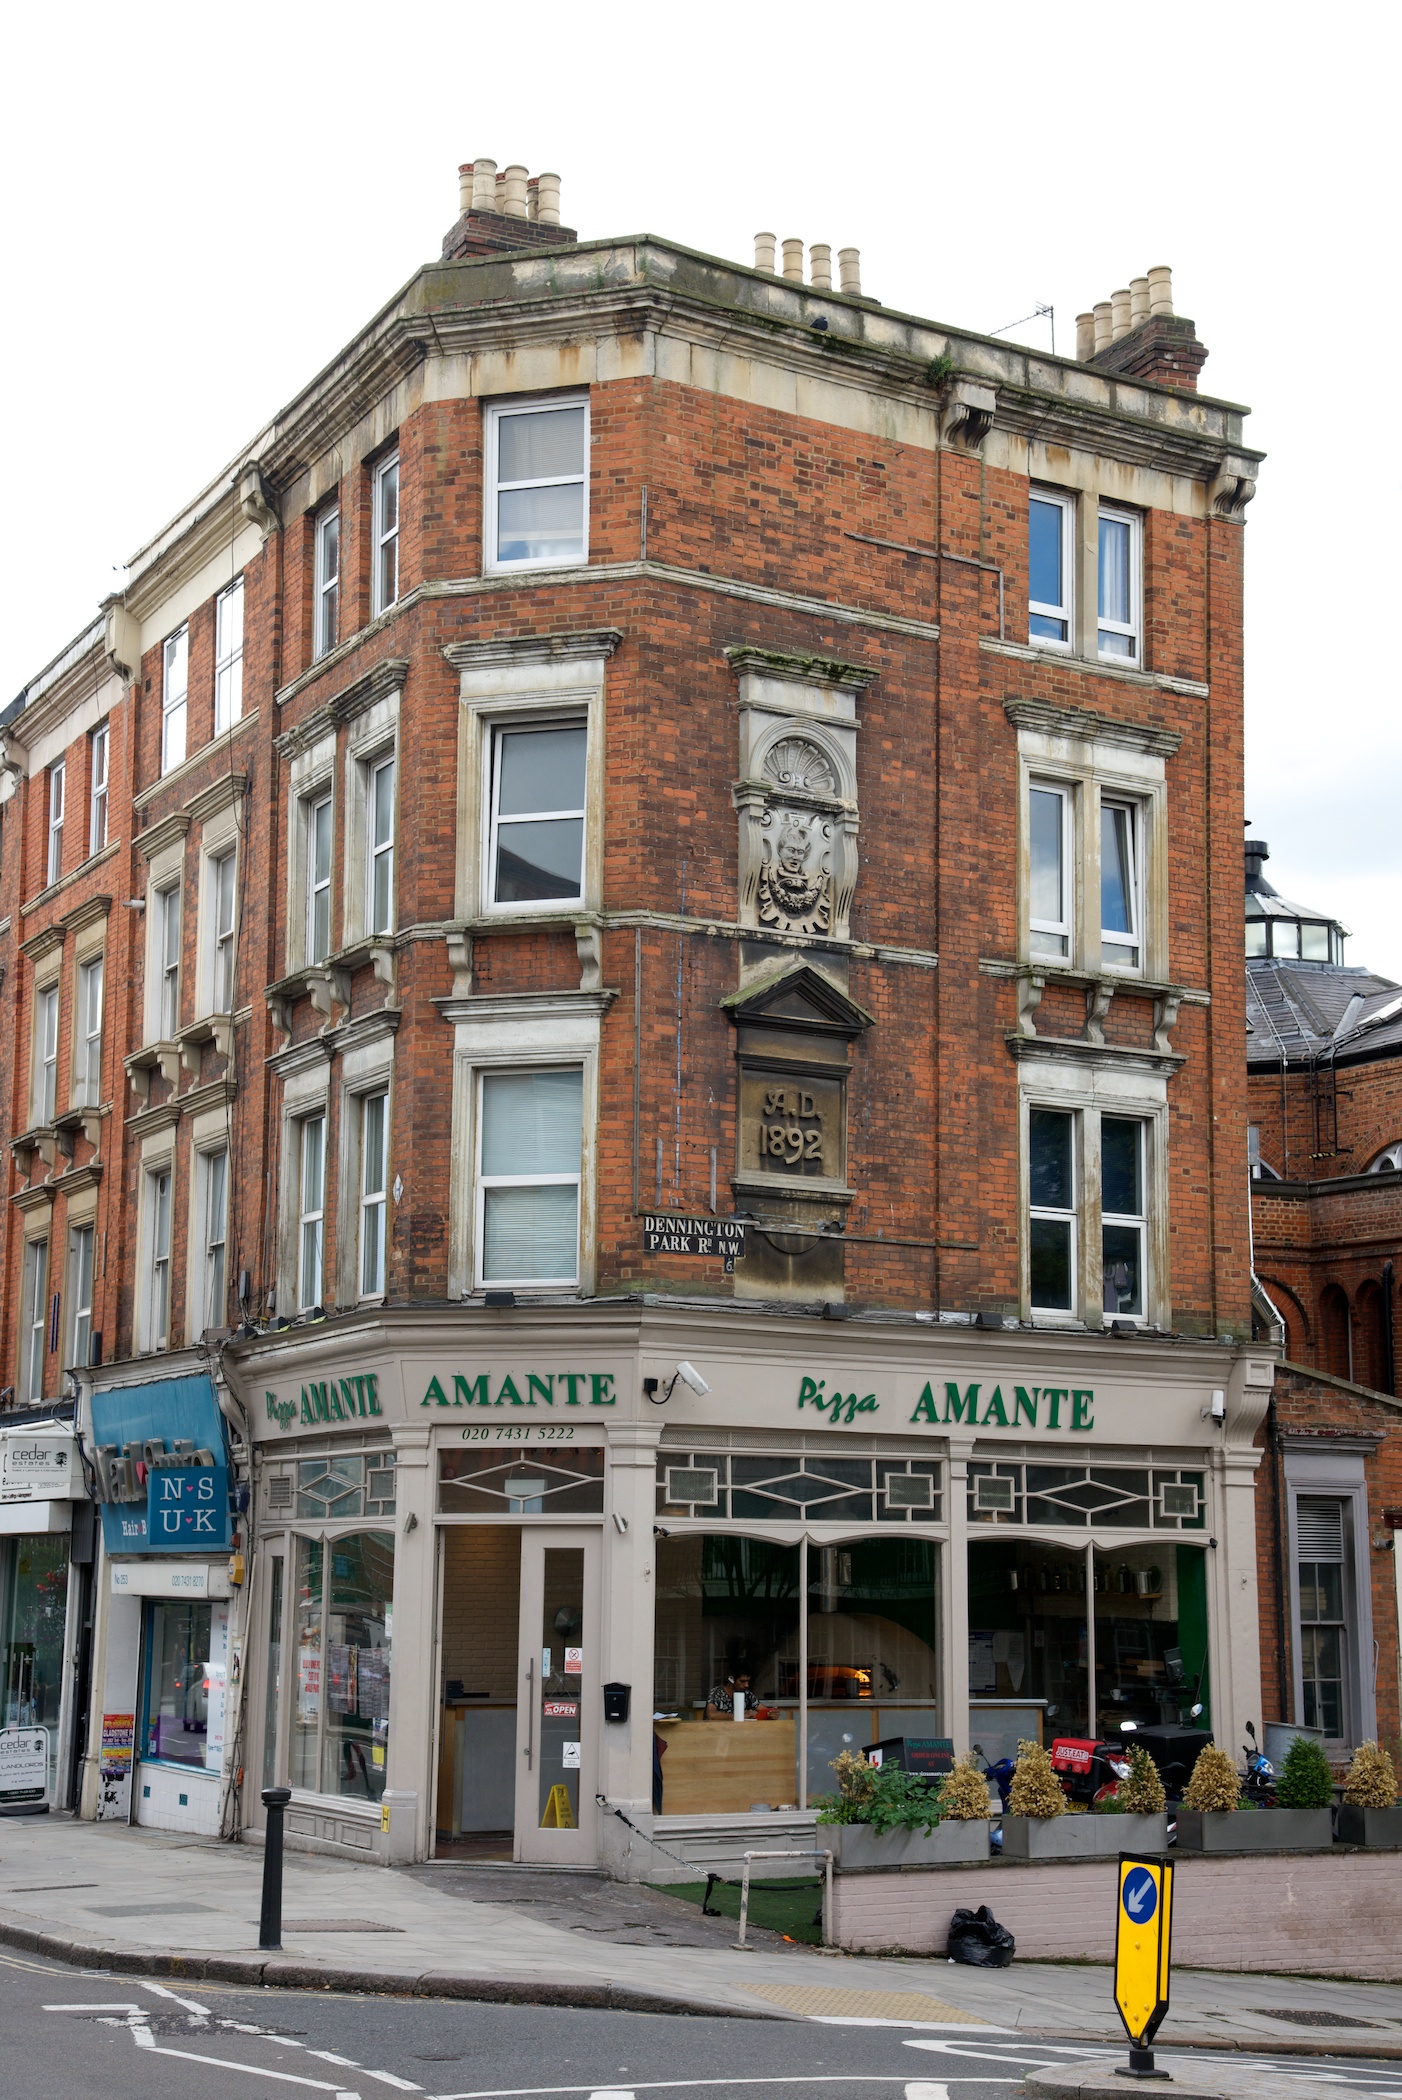 255 West End Lane, London NW6